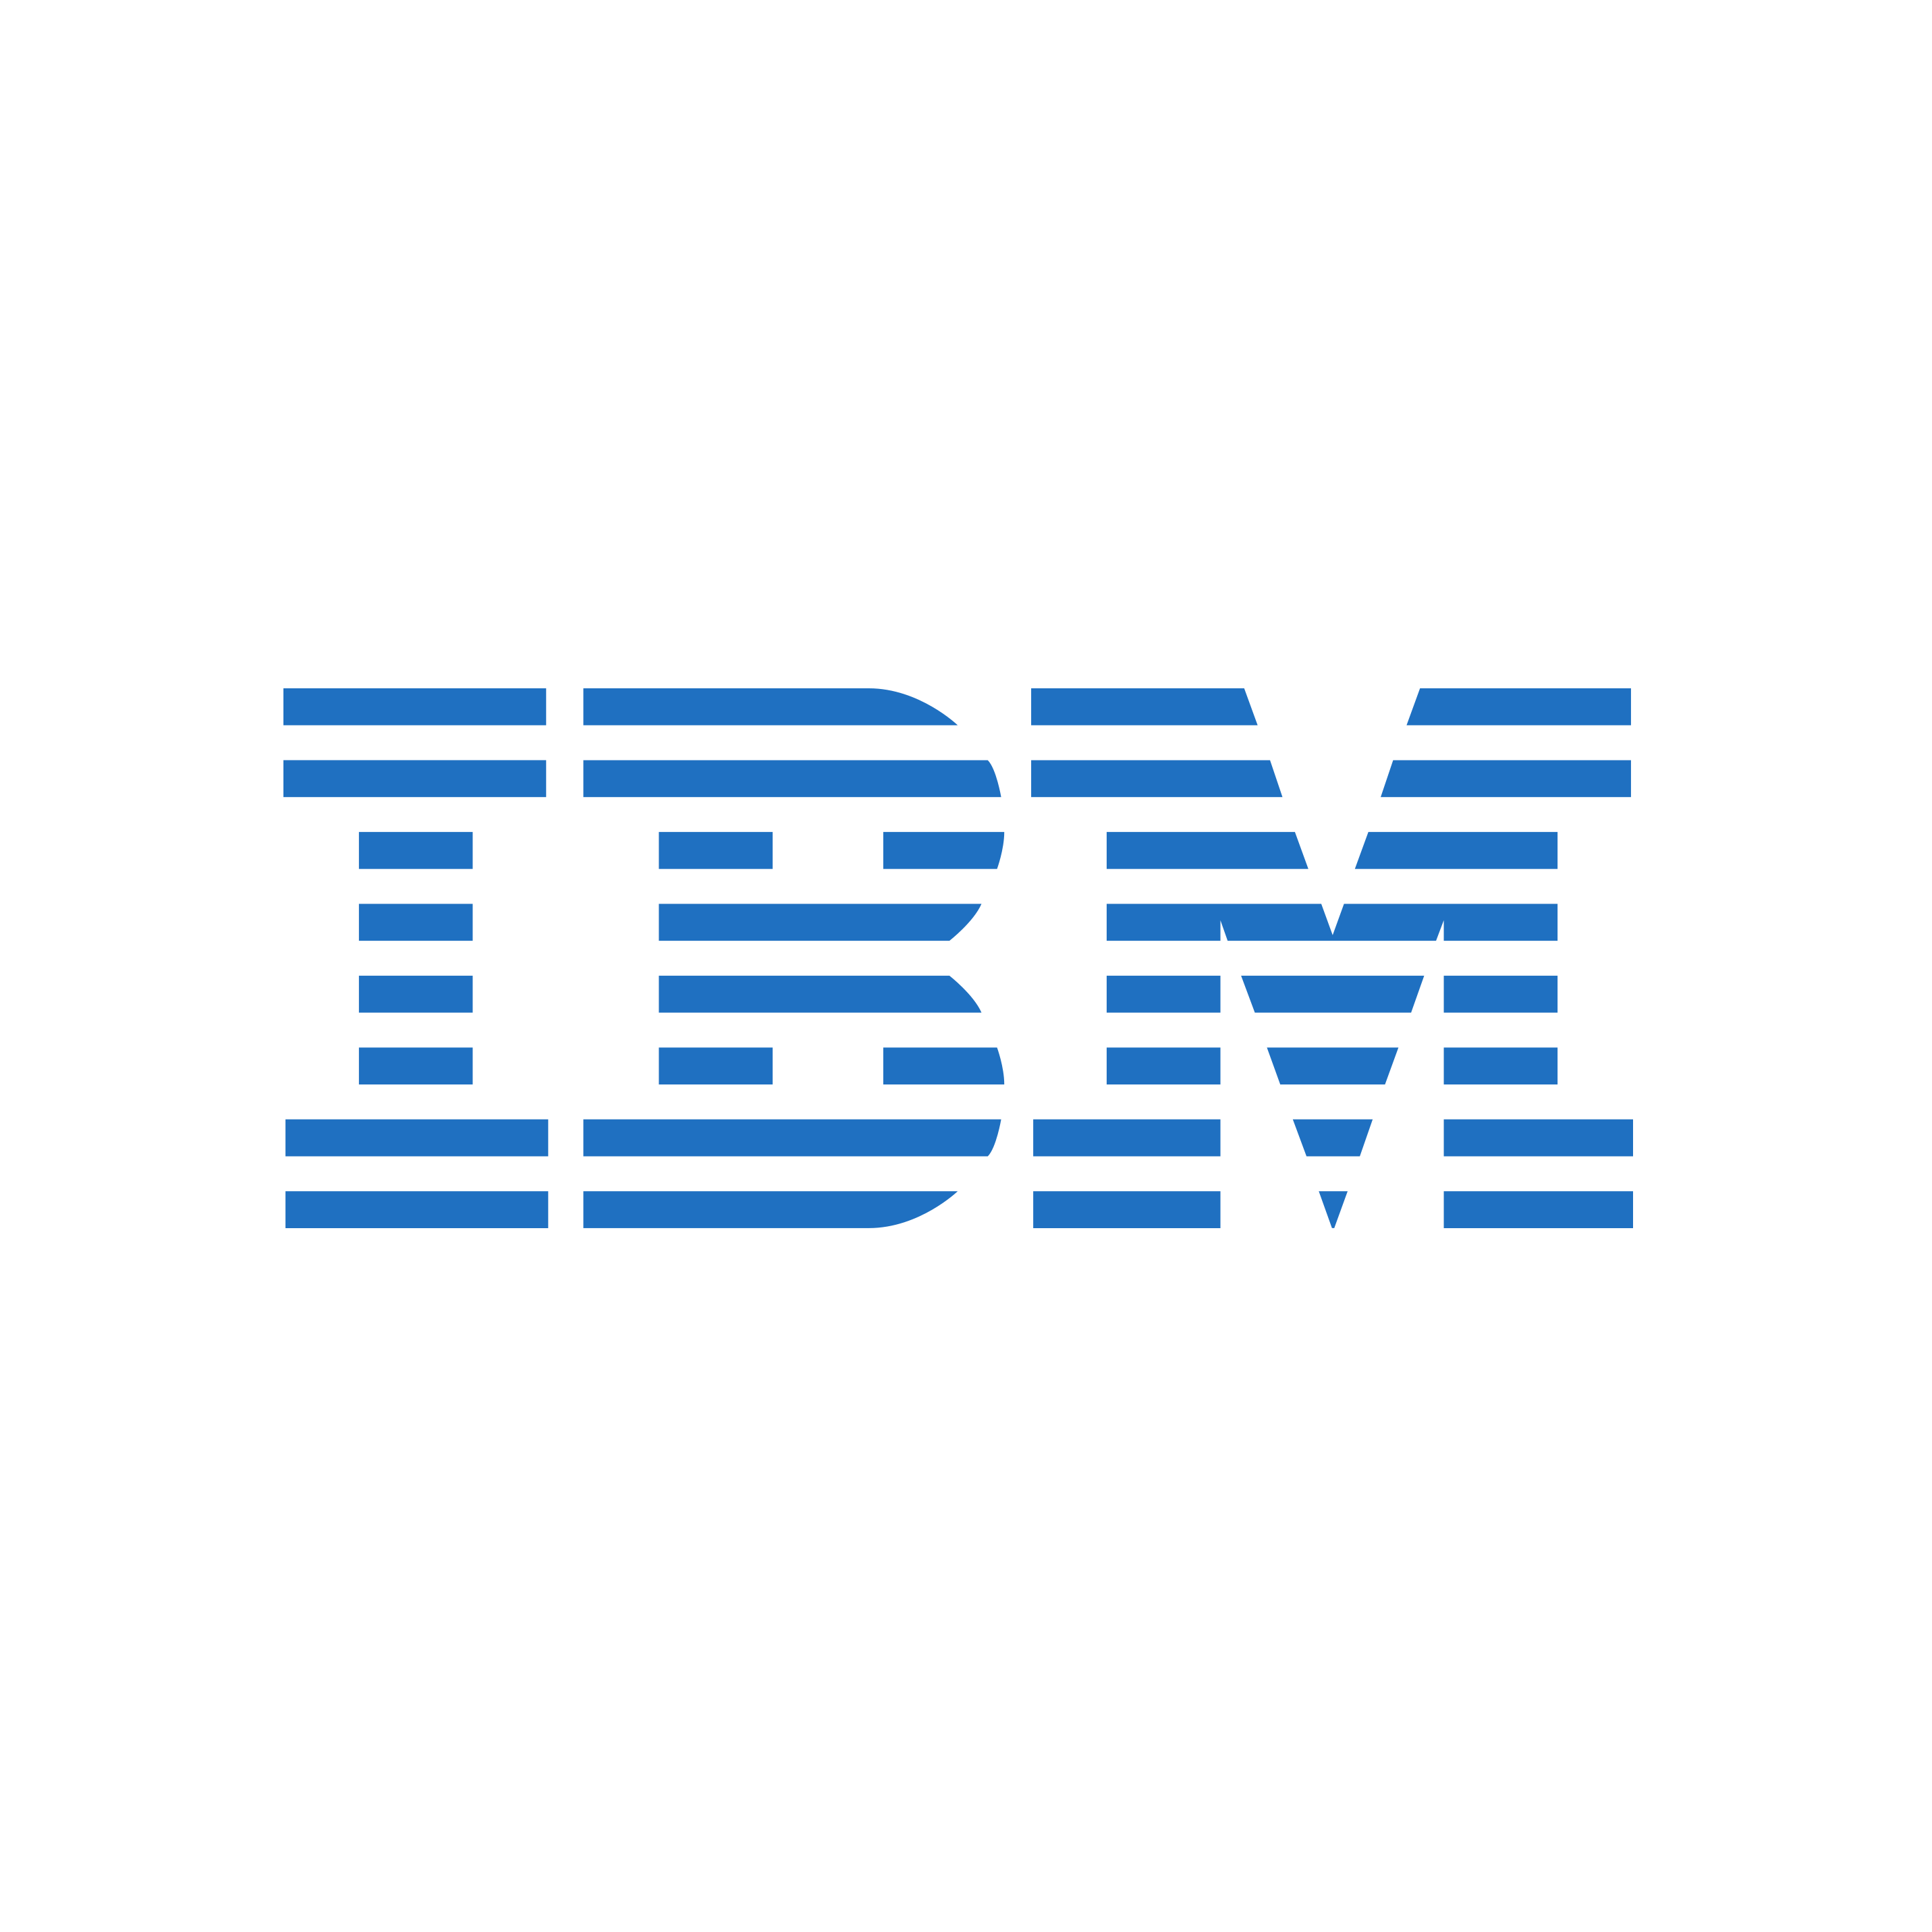 Information Ibm Business Personal Analytics Computer Technology PNG Image